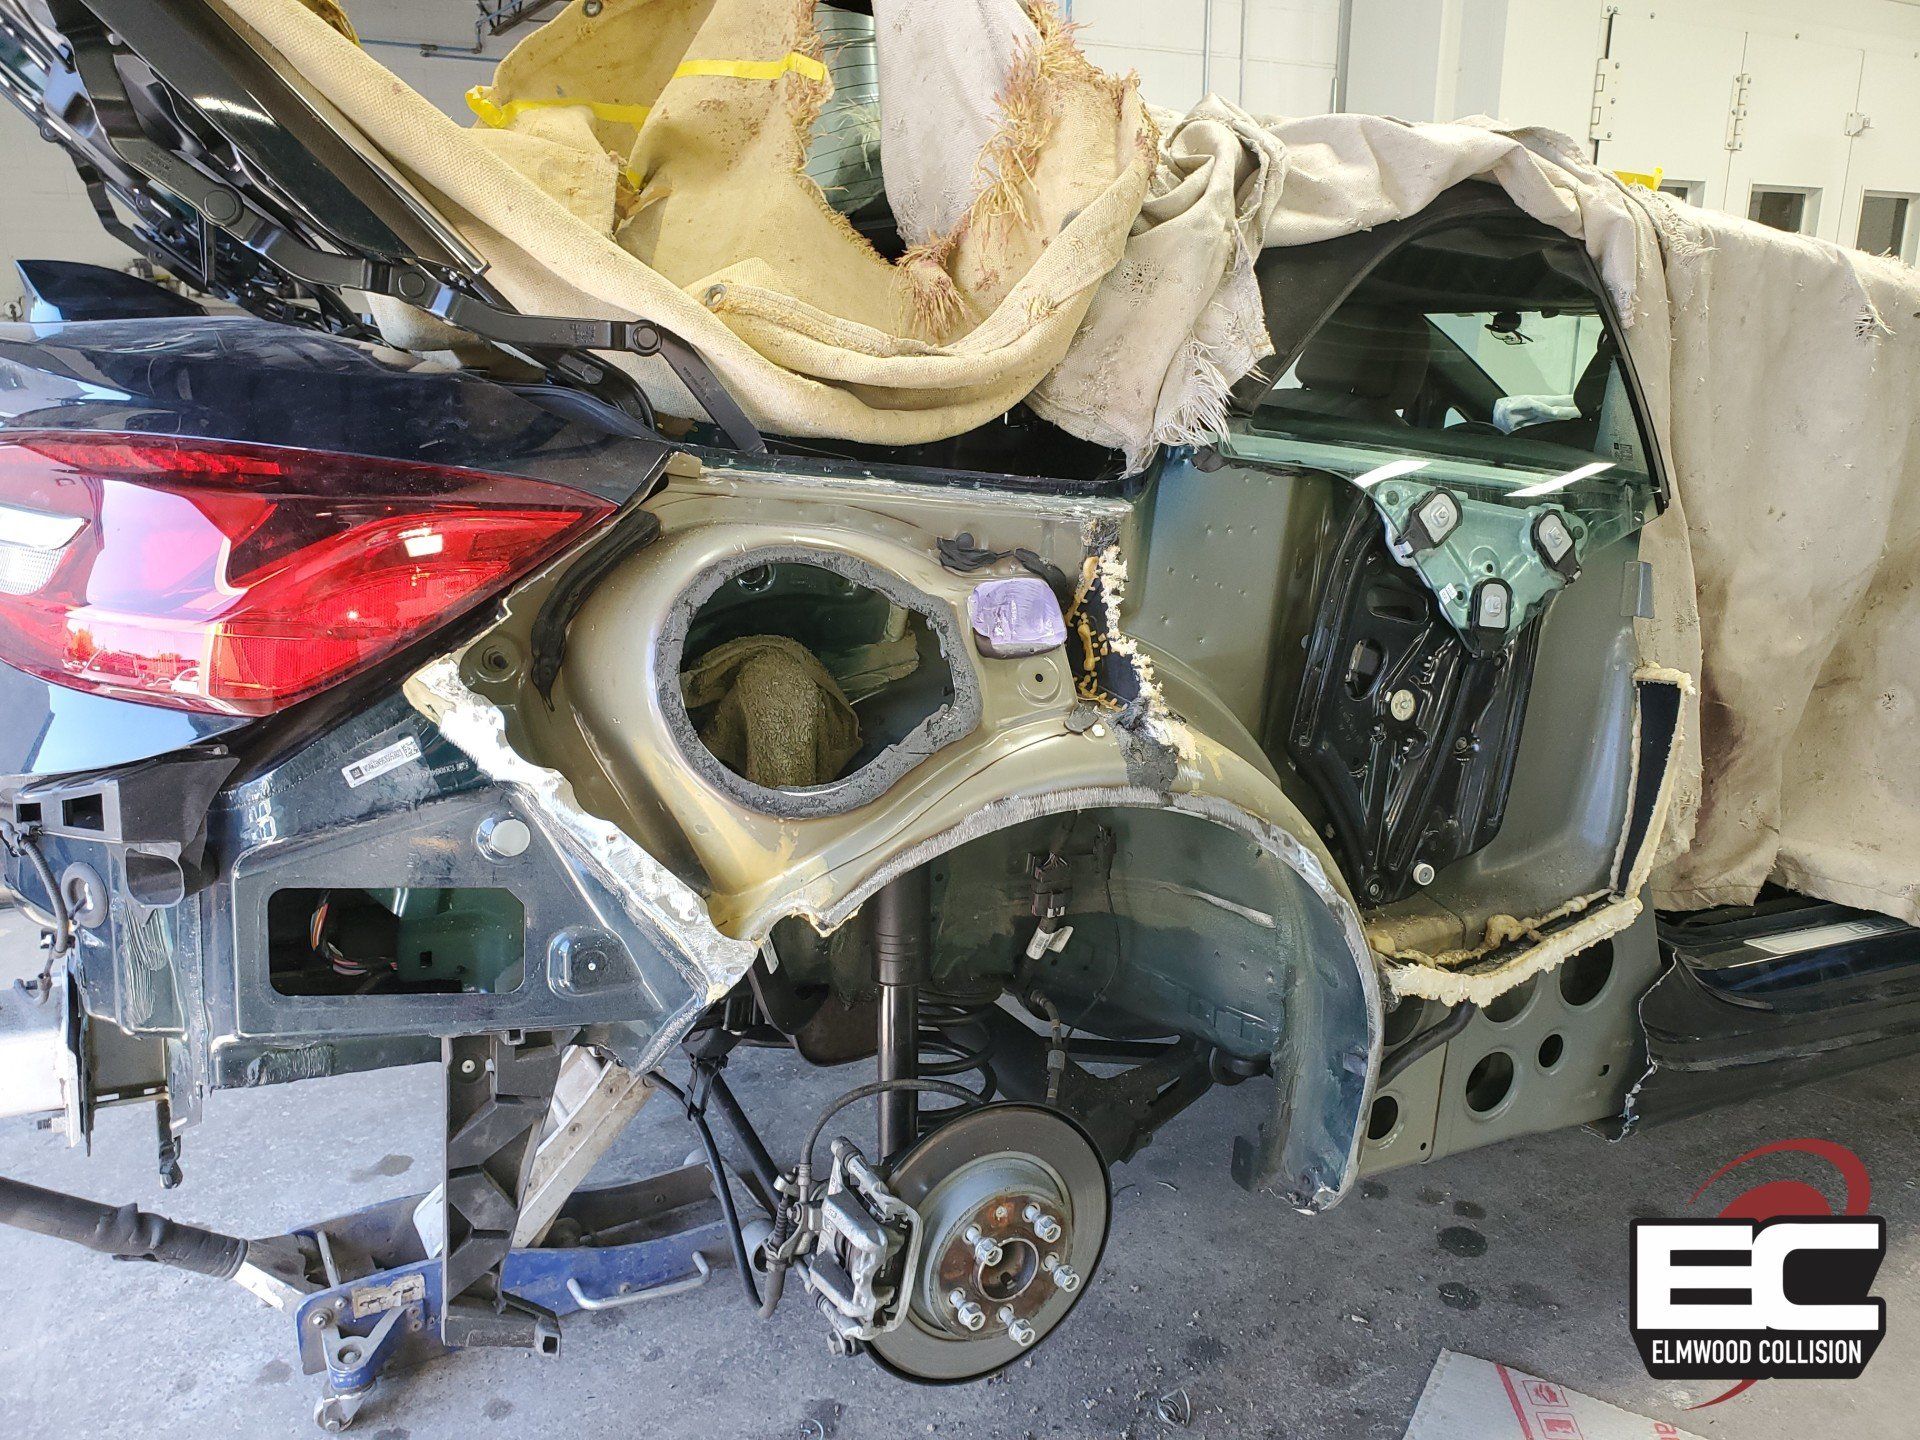 Elmwood Collision 2018 Buick Cascada with damaged quarter panel removed